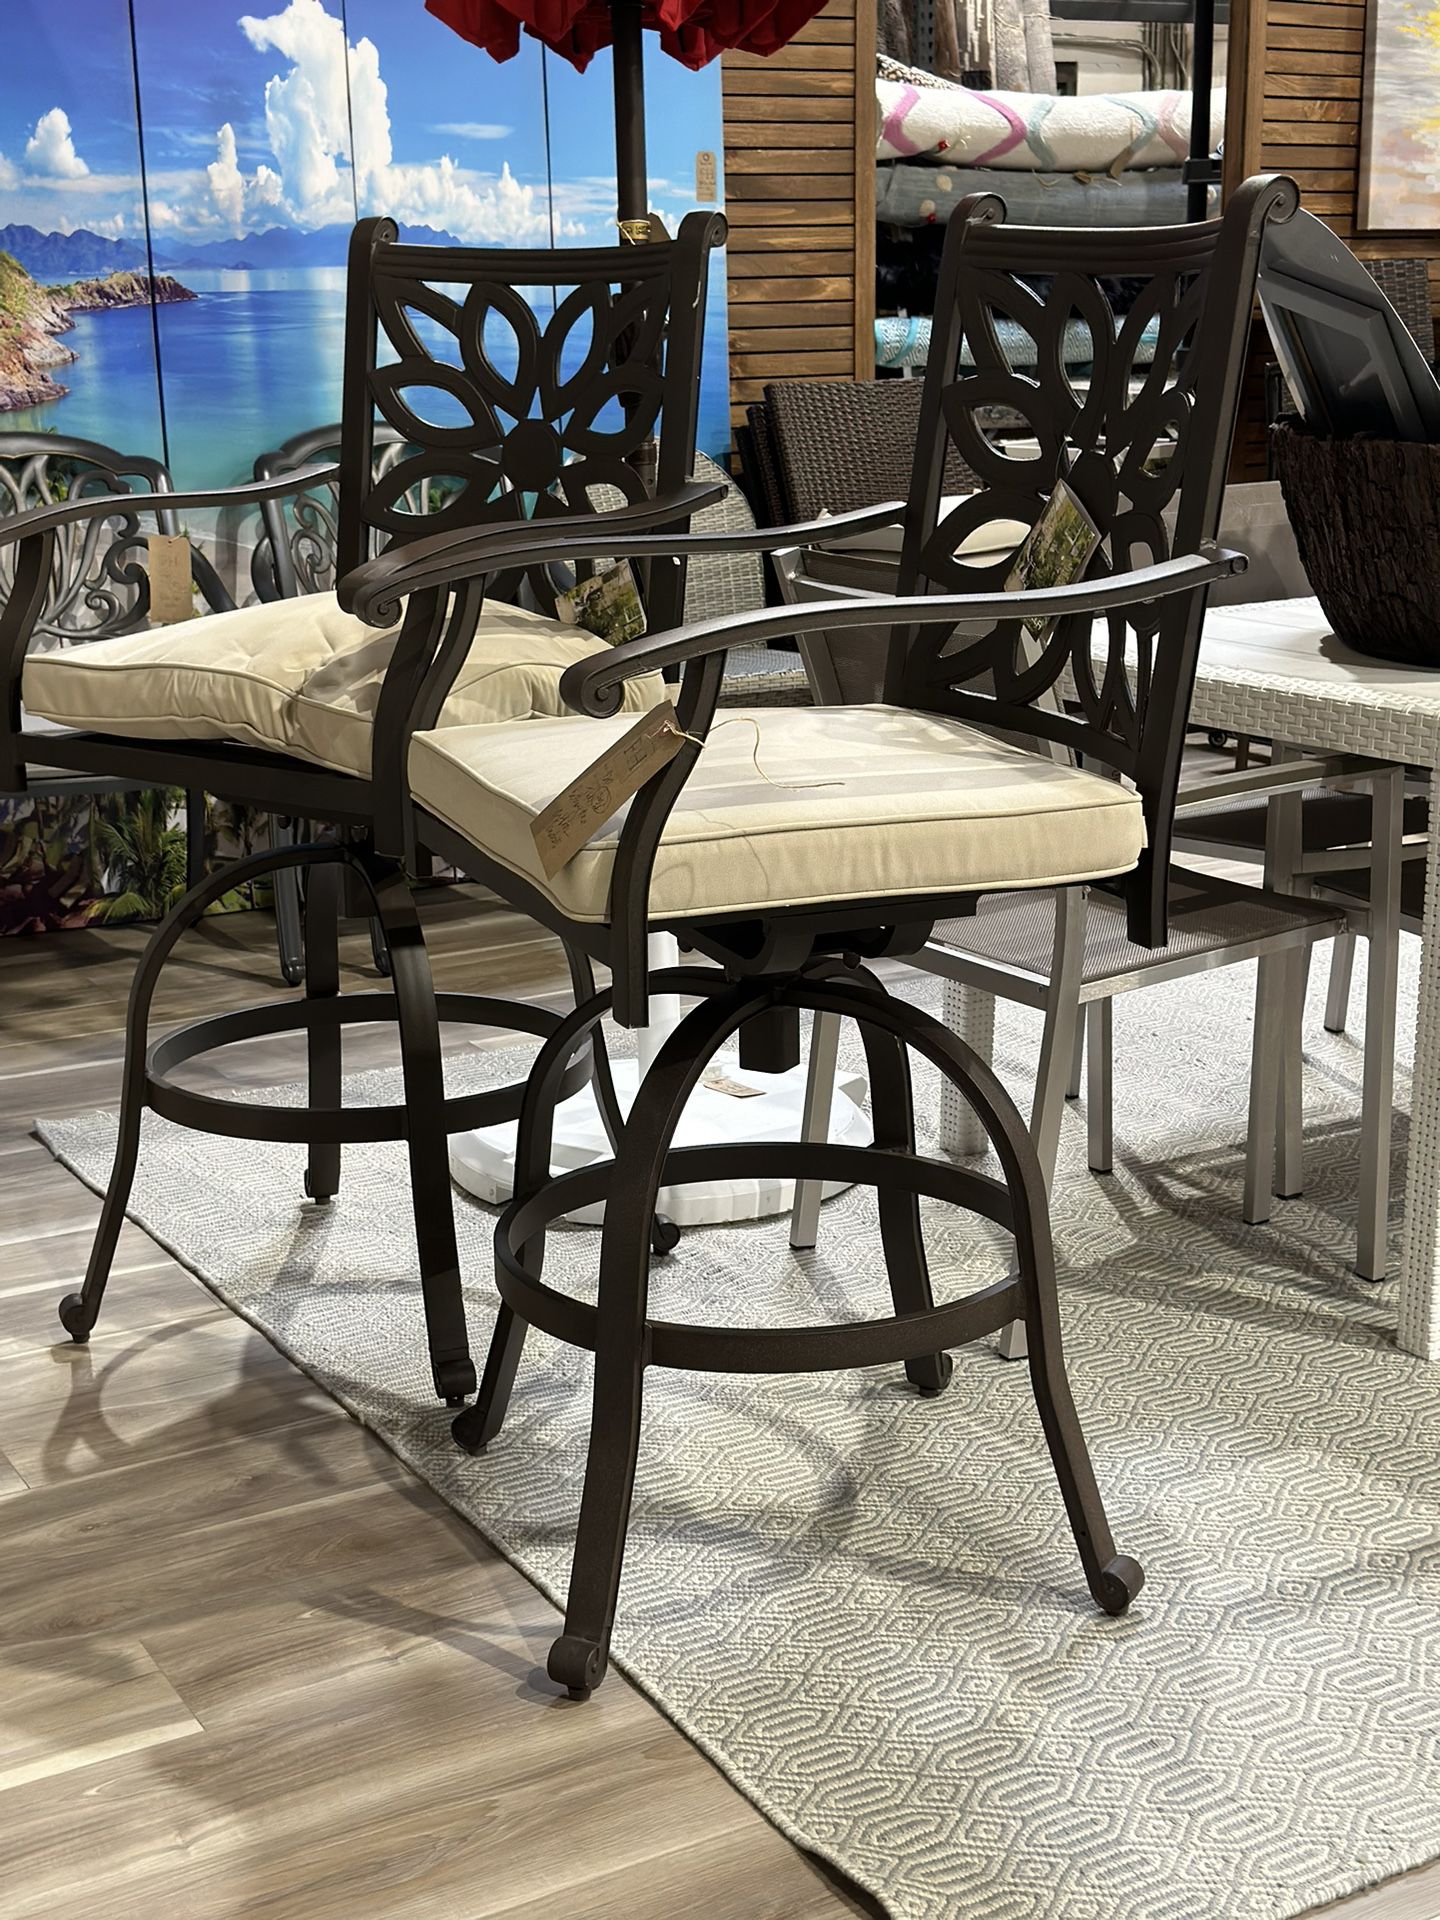 {TWO} Bethany-Ann 27.8" Patio Bar Stool With Cushions. MSRP $720. Our price $360 + sales tax 